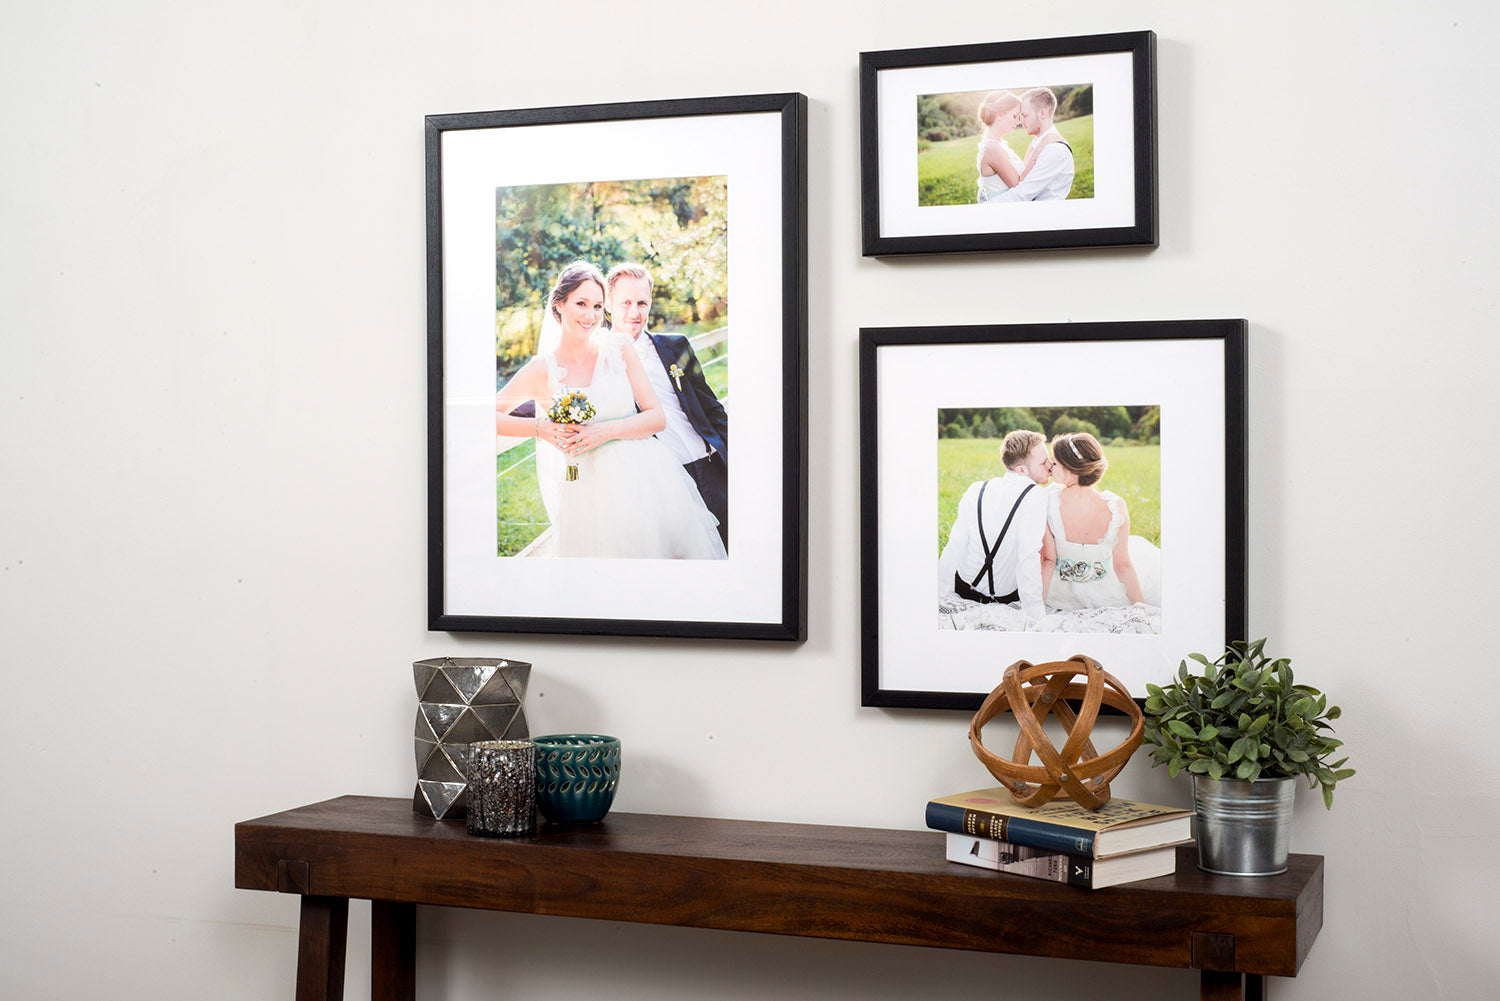 Gallery Frames with Wedding Photos - Custom Framed Prints by Posterjack Canada